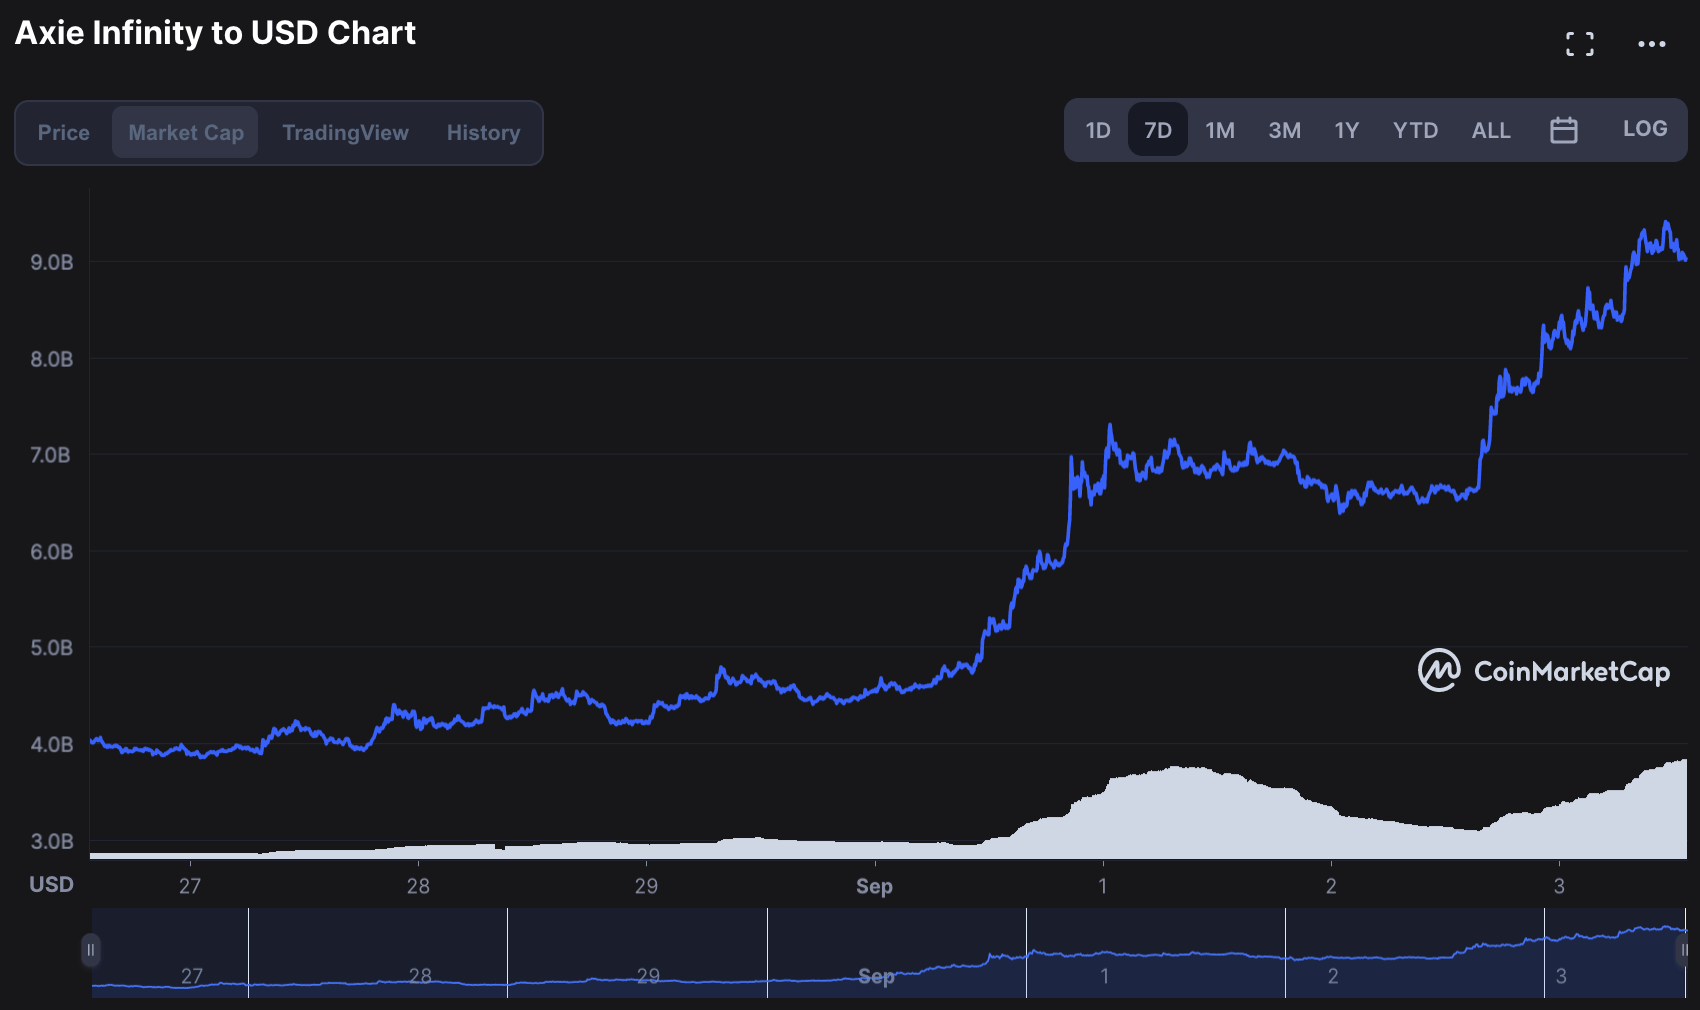 graph showing AXS market cap increase from $4 billion to $9 billion in 7 days